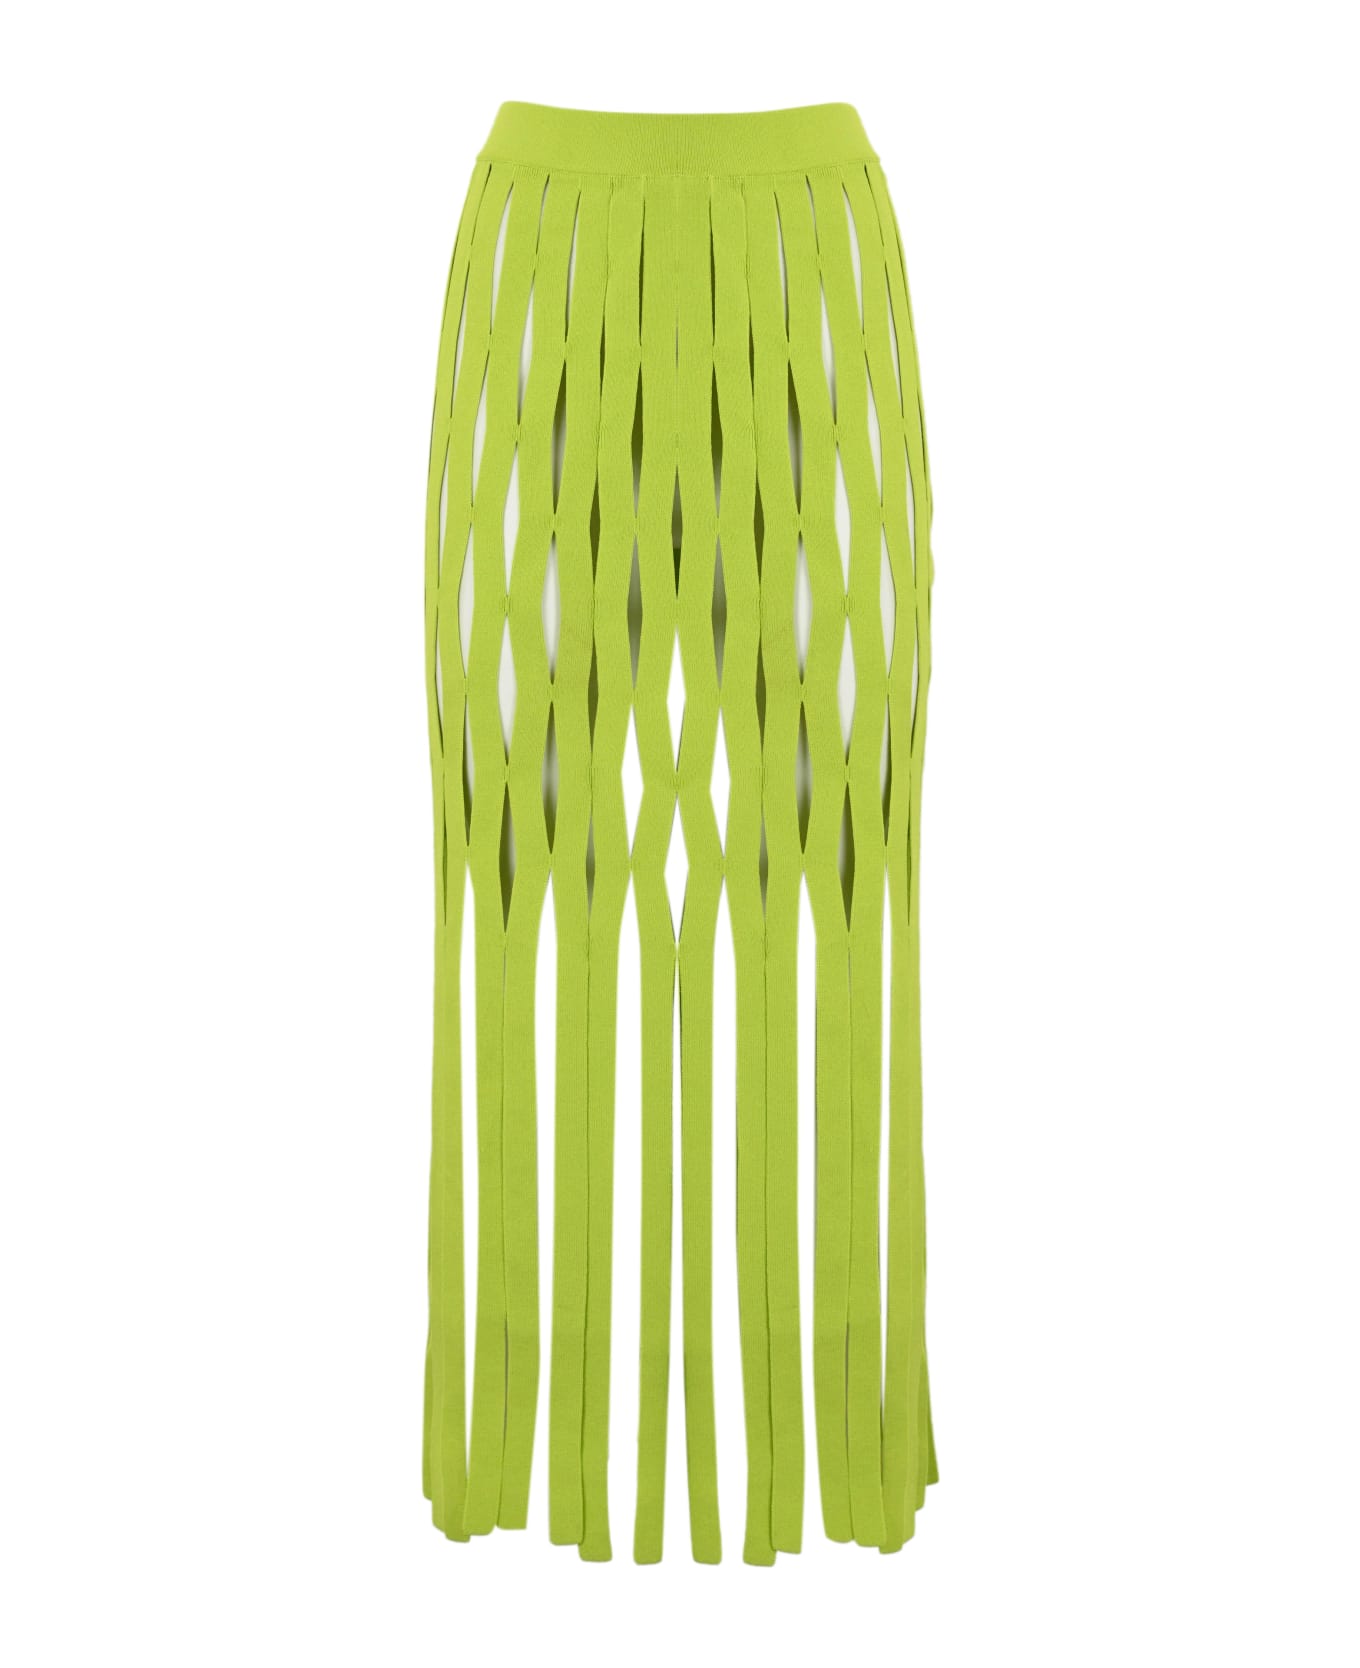 Liviana Conti Viscose Skirt With Ribbons - Cyber lime